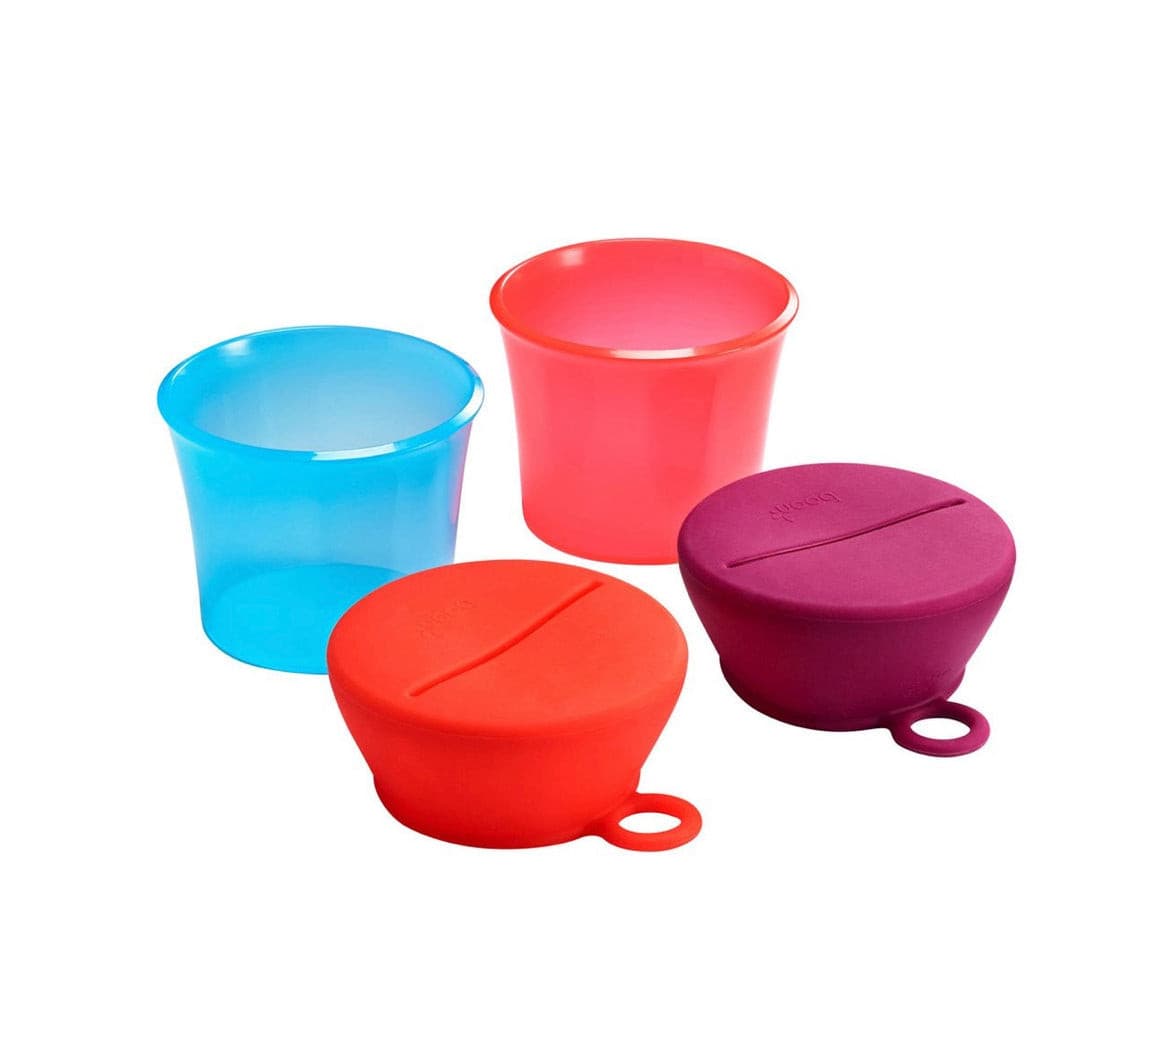 Boon - SNUG Snack Containers With Stretchy Silicone Lids.